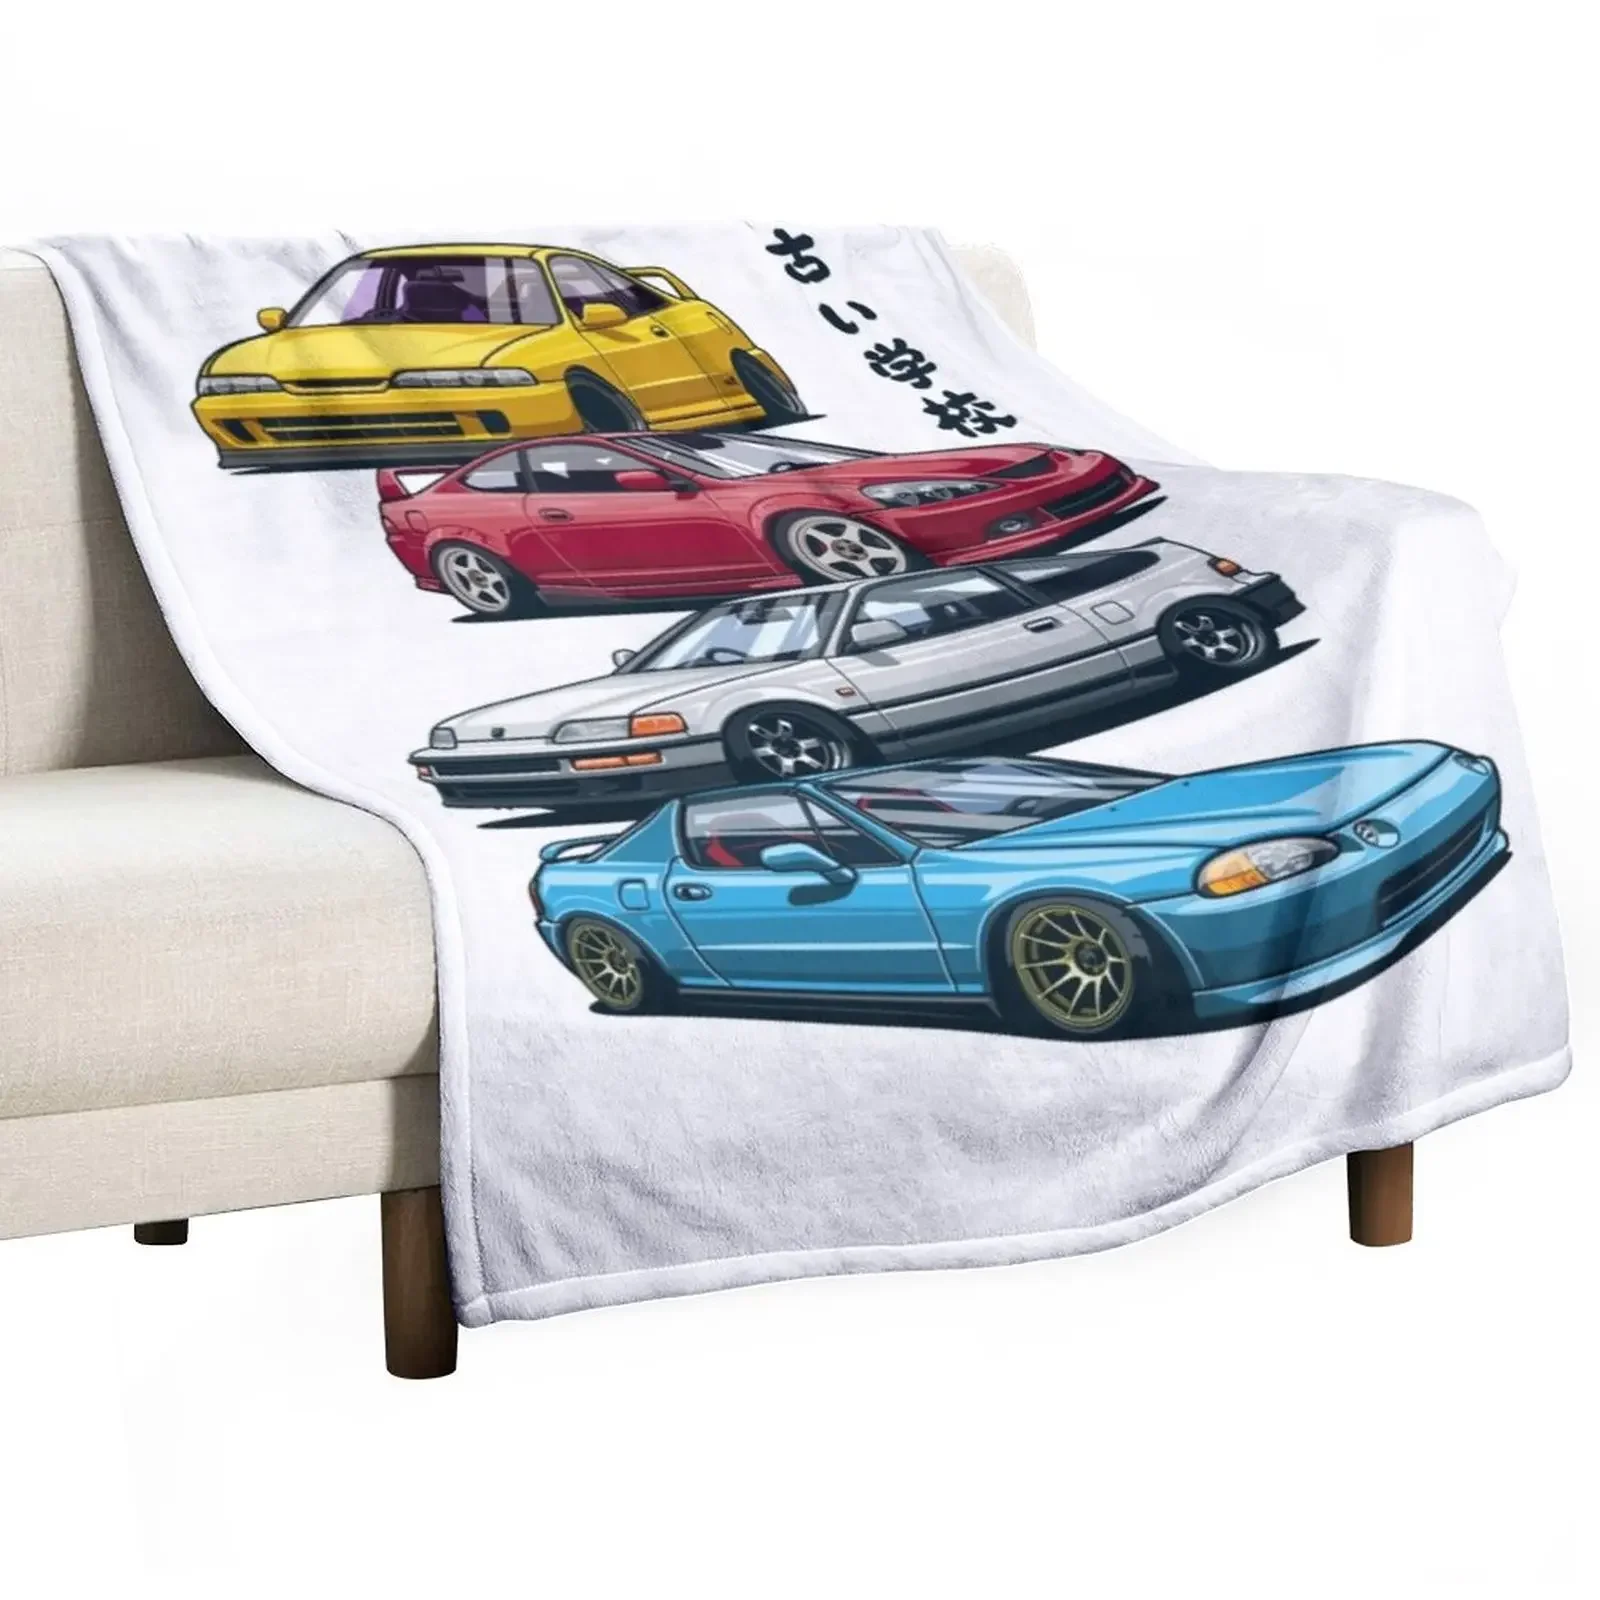 

JDM Mix Civic CRX Integra Throw Blanket blankets ands Bed Fashionable Blankets